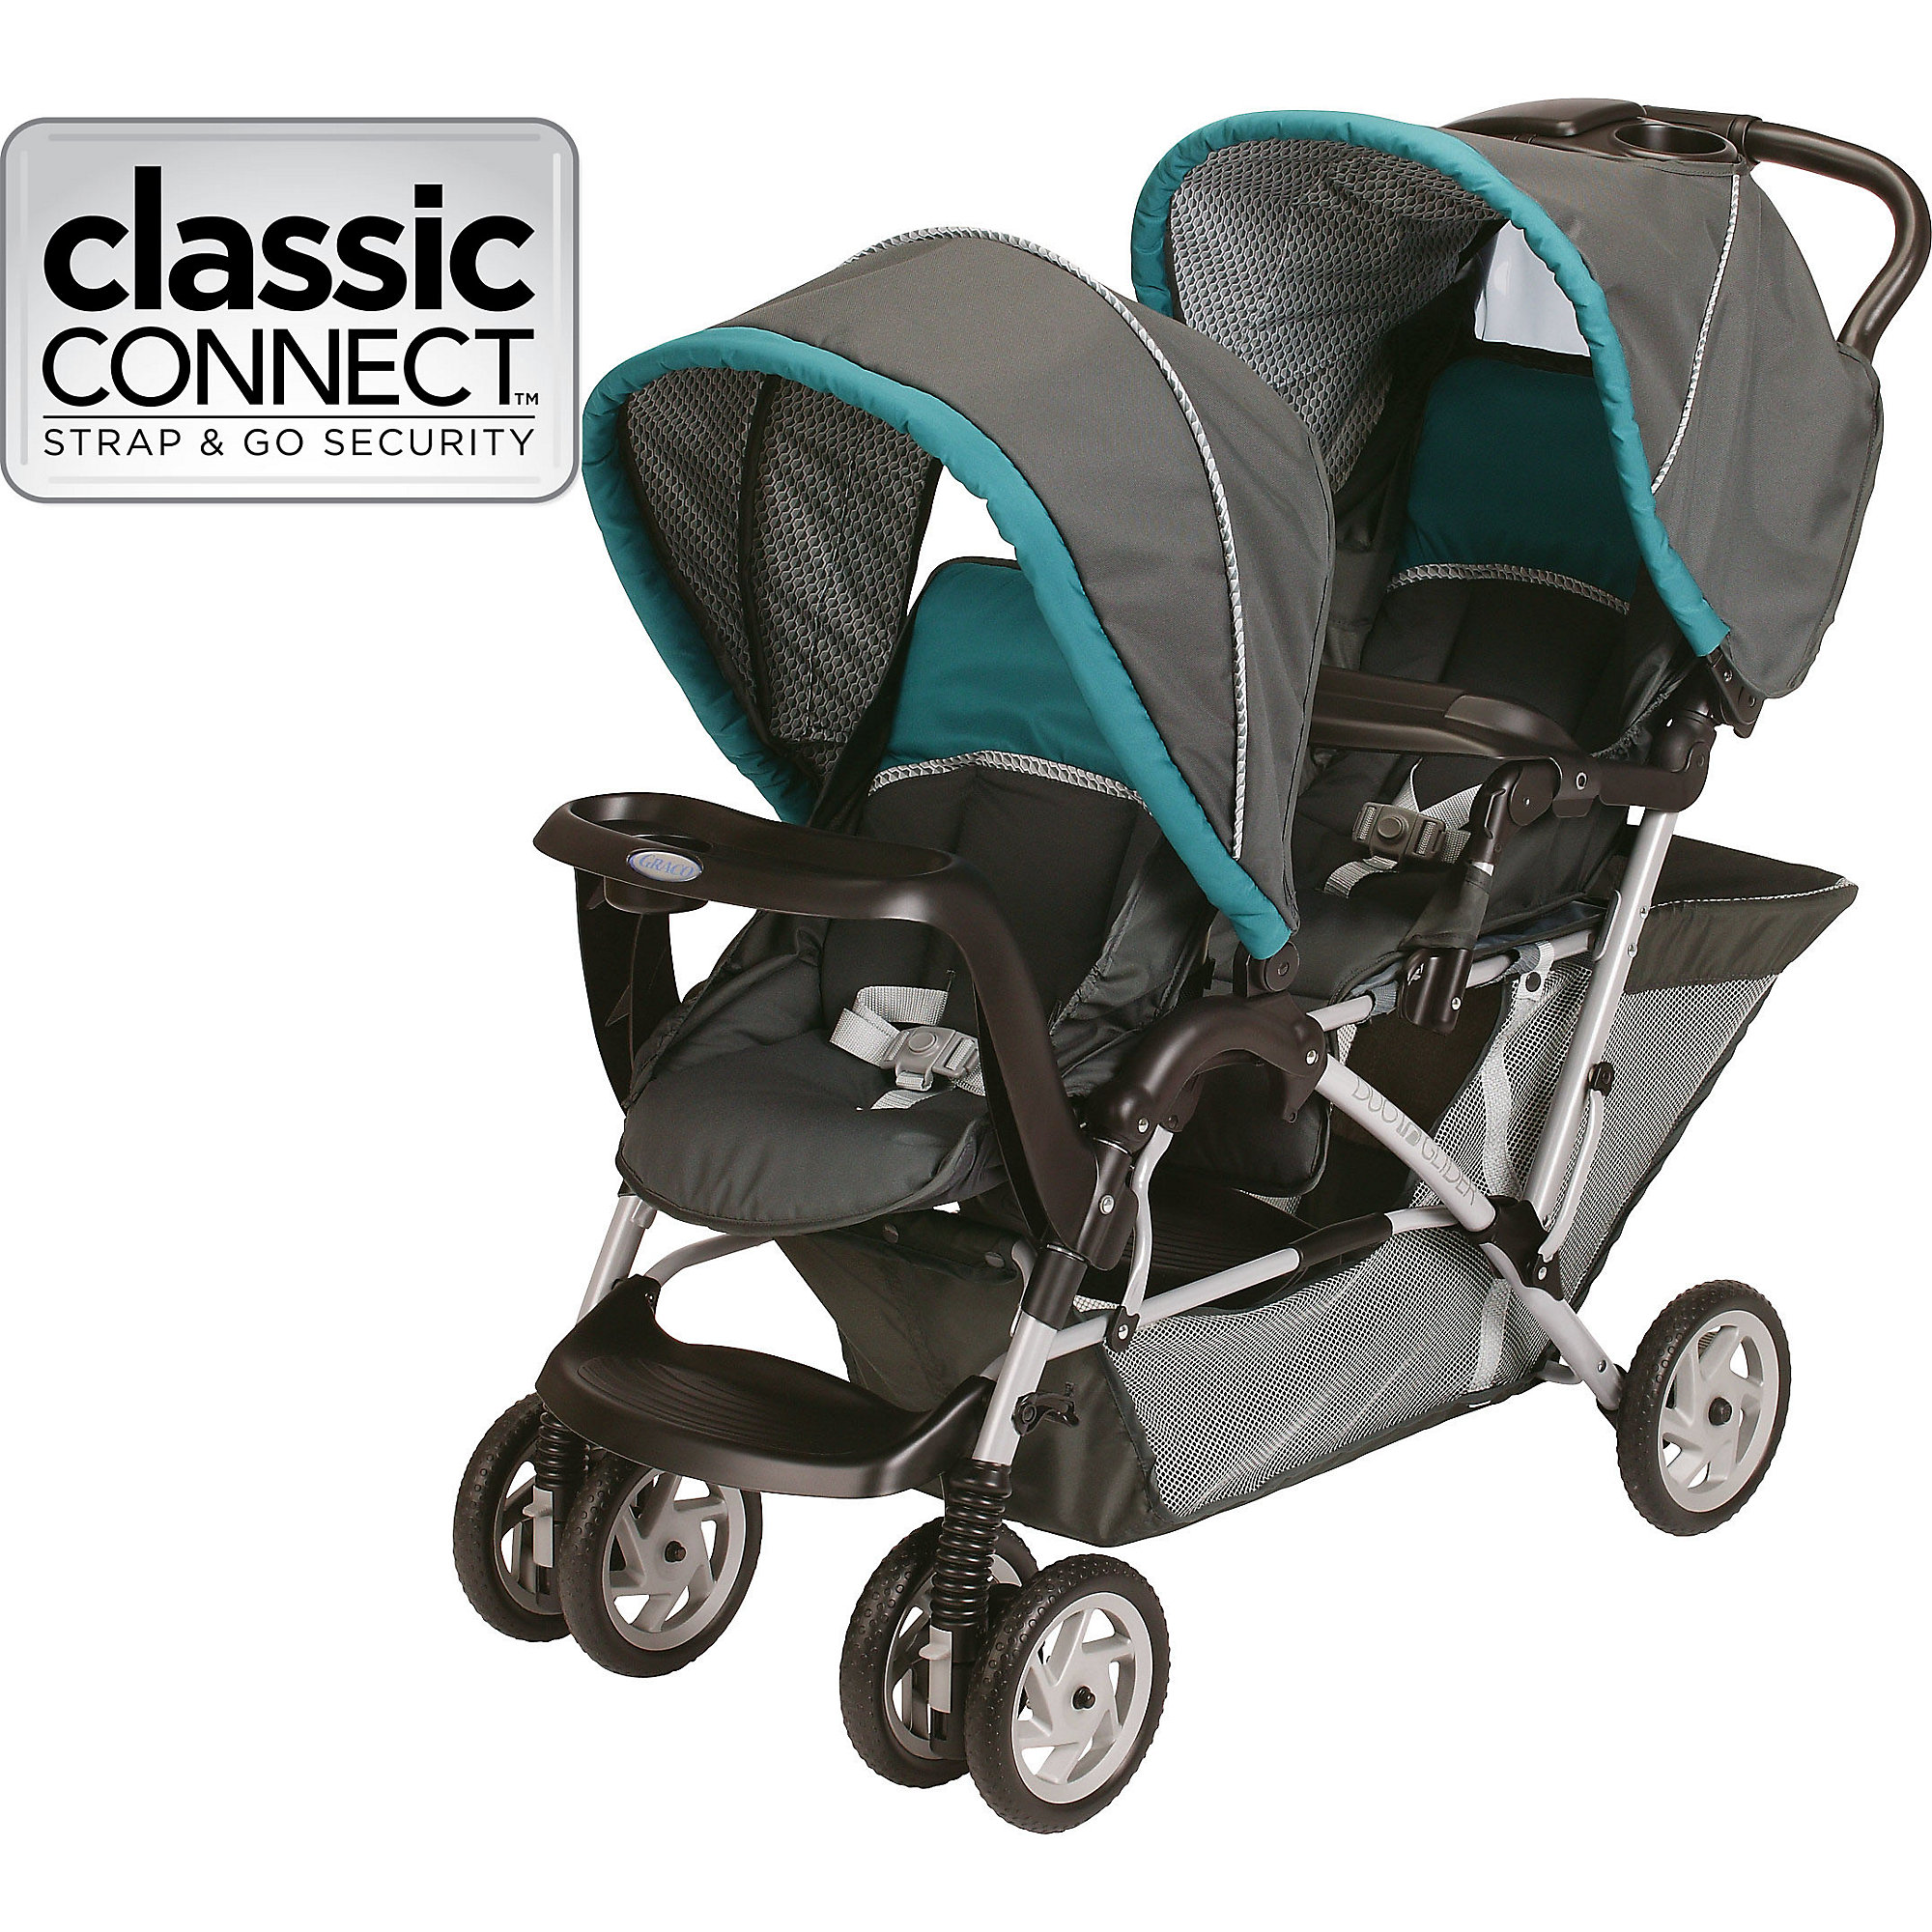 Graco DuoGlider Stroller Classic Connect